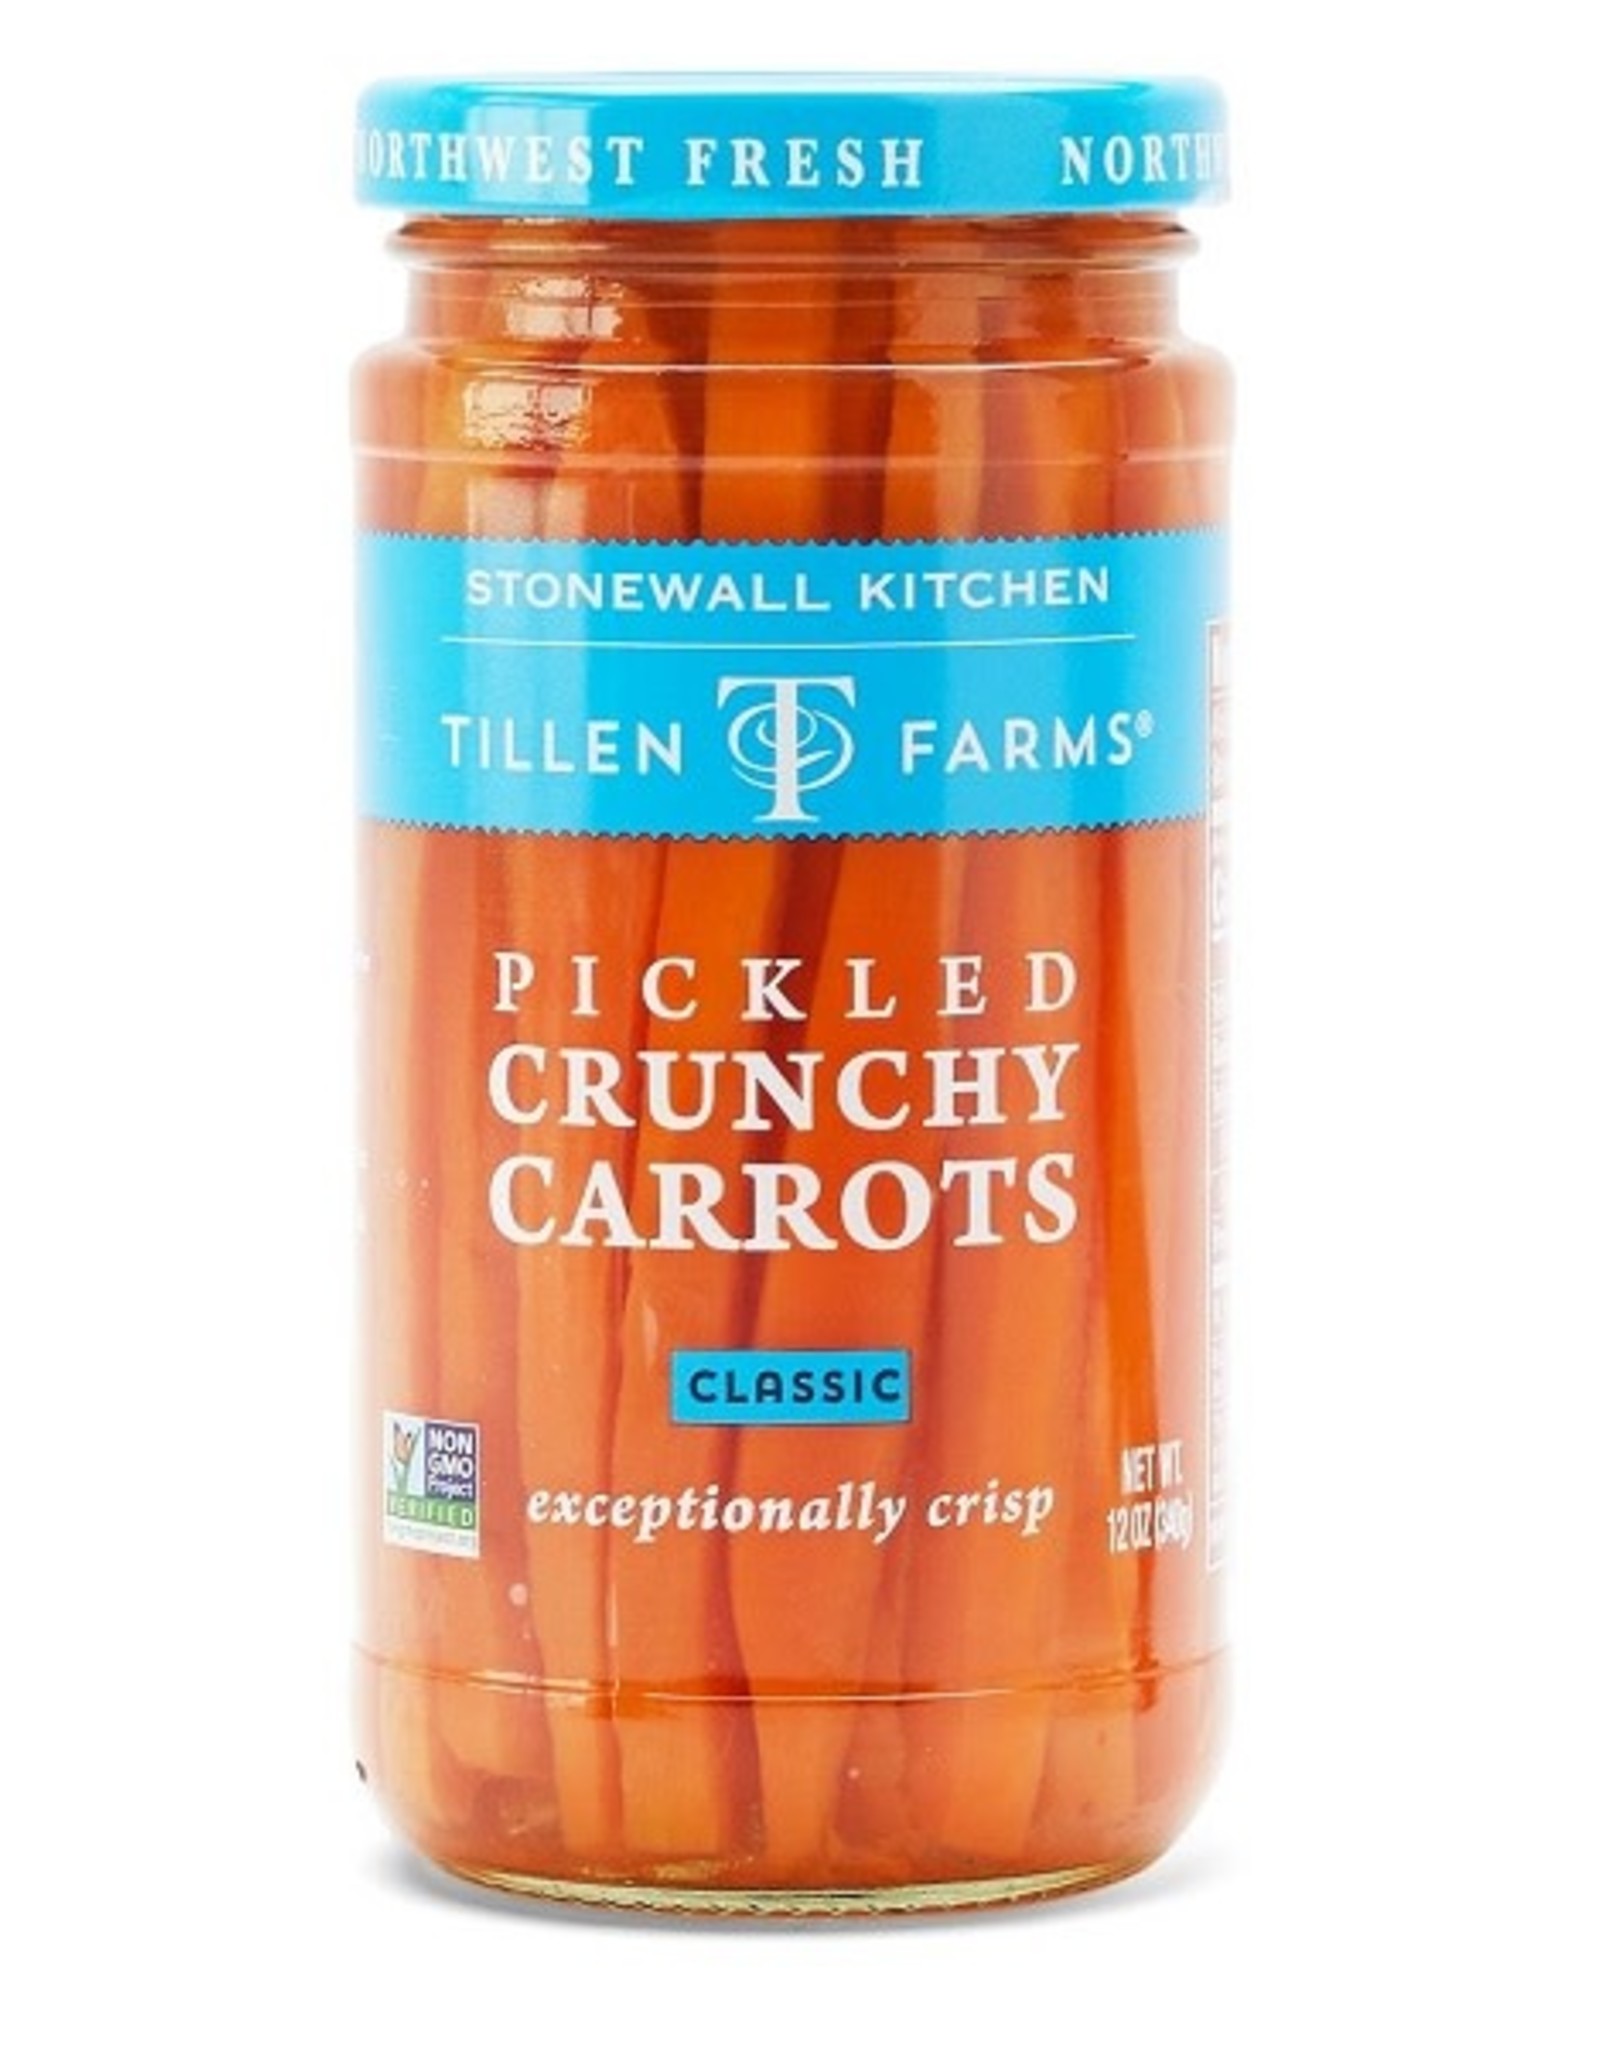 Stonewall Kitchen PICKLED CRUNCHY CARROTS